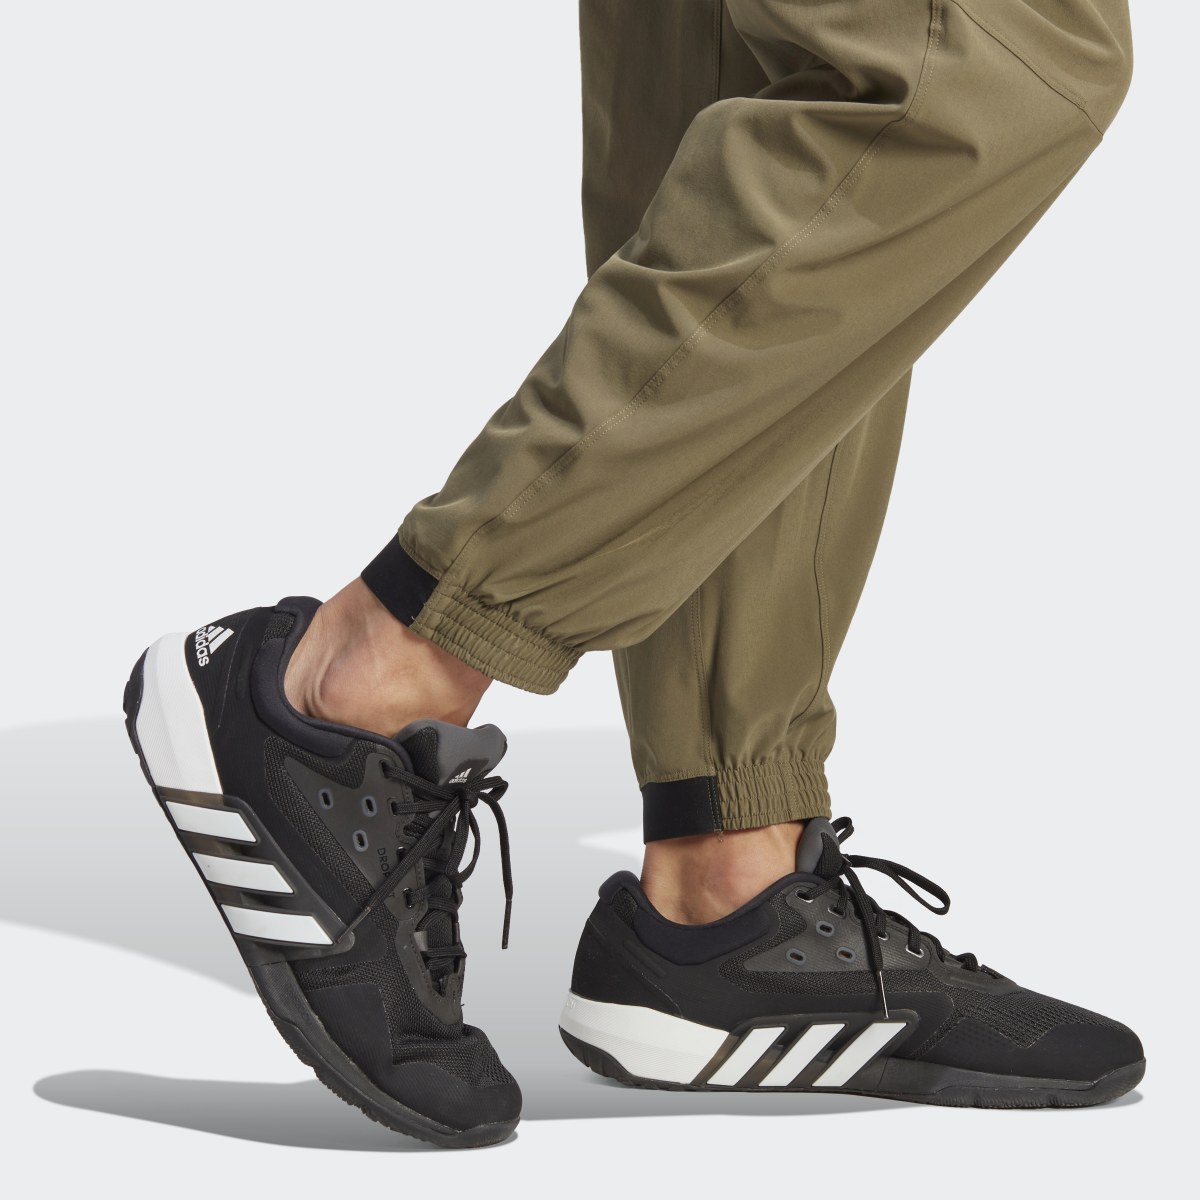 Adidas Designed for Training Pro Series Strength Pants. 8